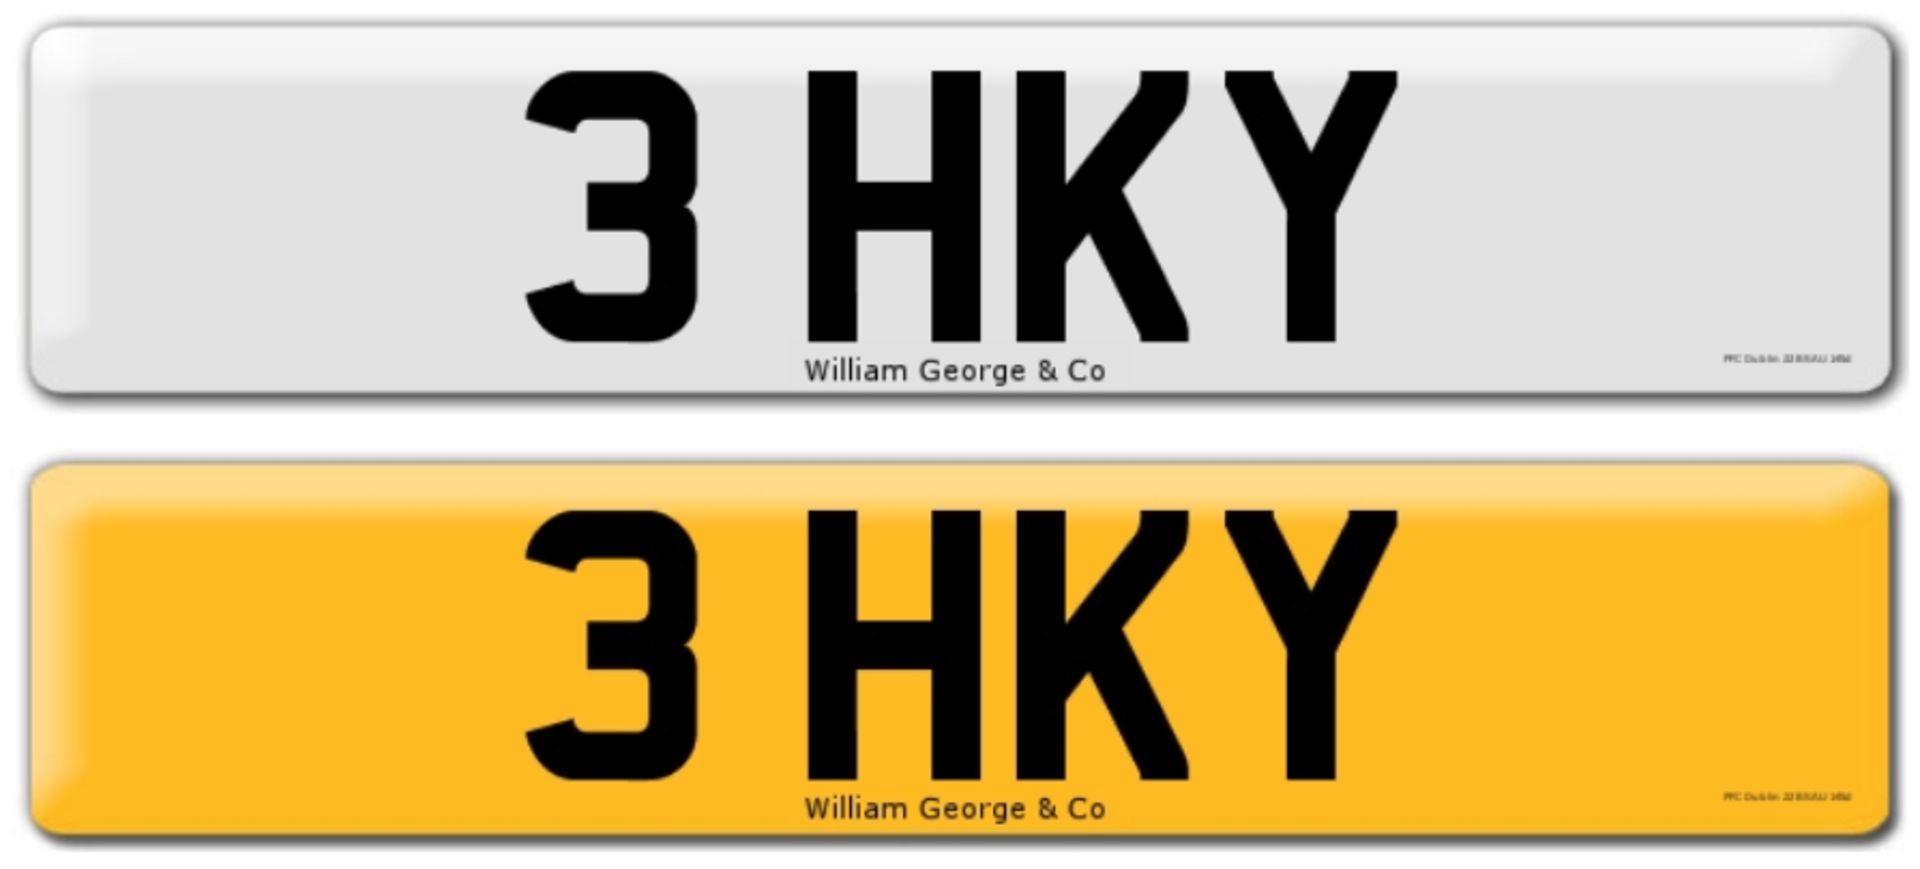 Registration on DVLA retention certificate, ready to transfer 3 HKY, This number plate /